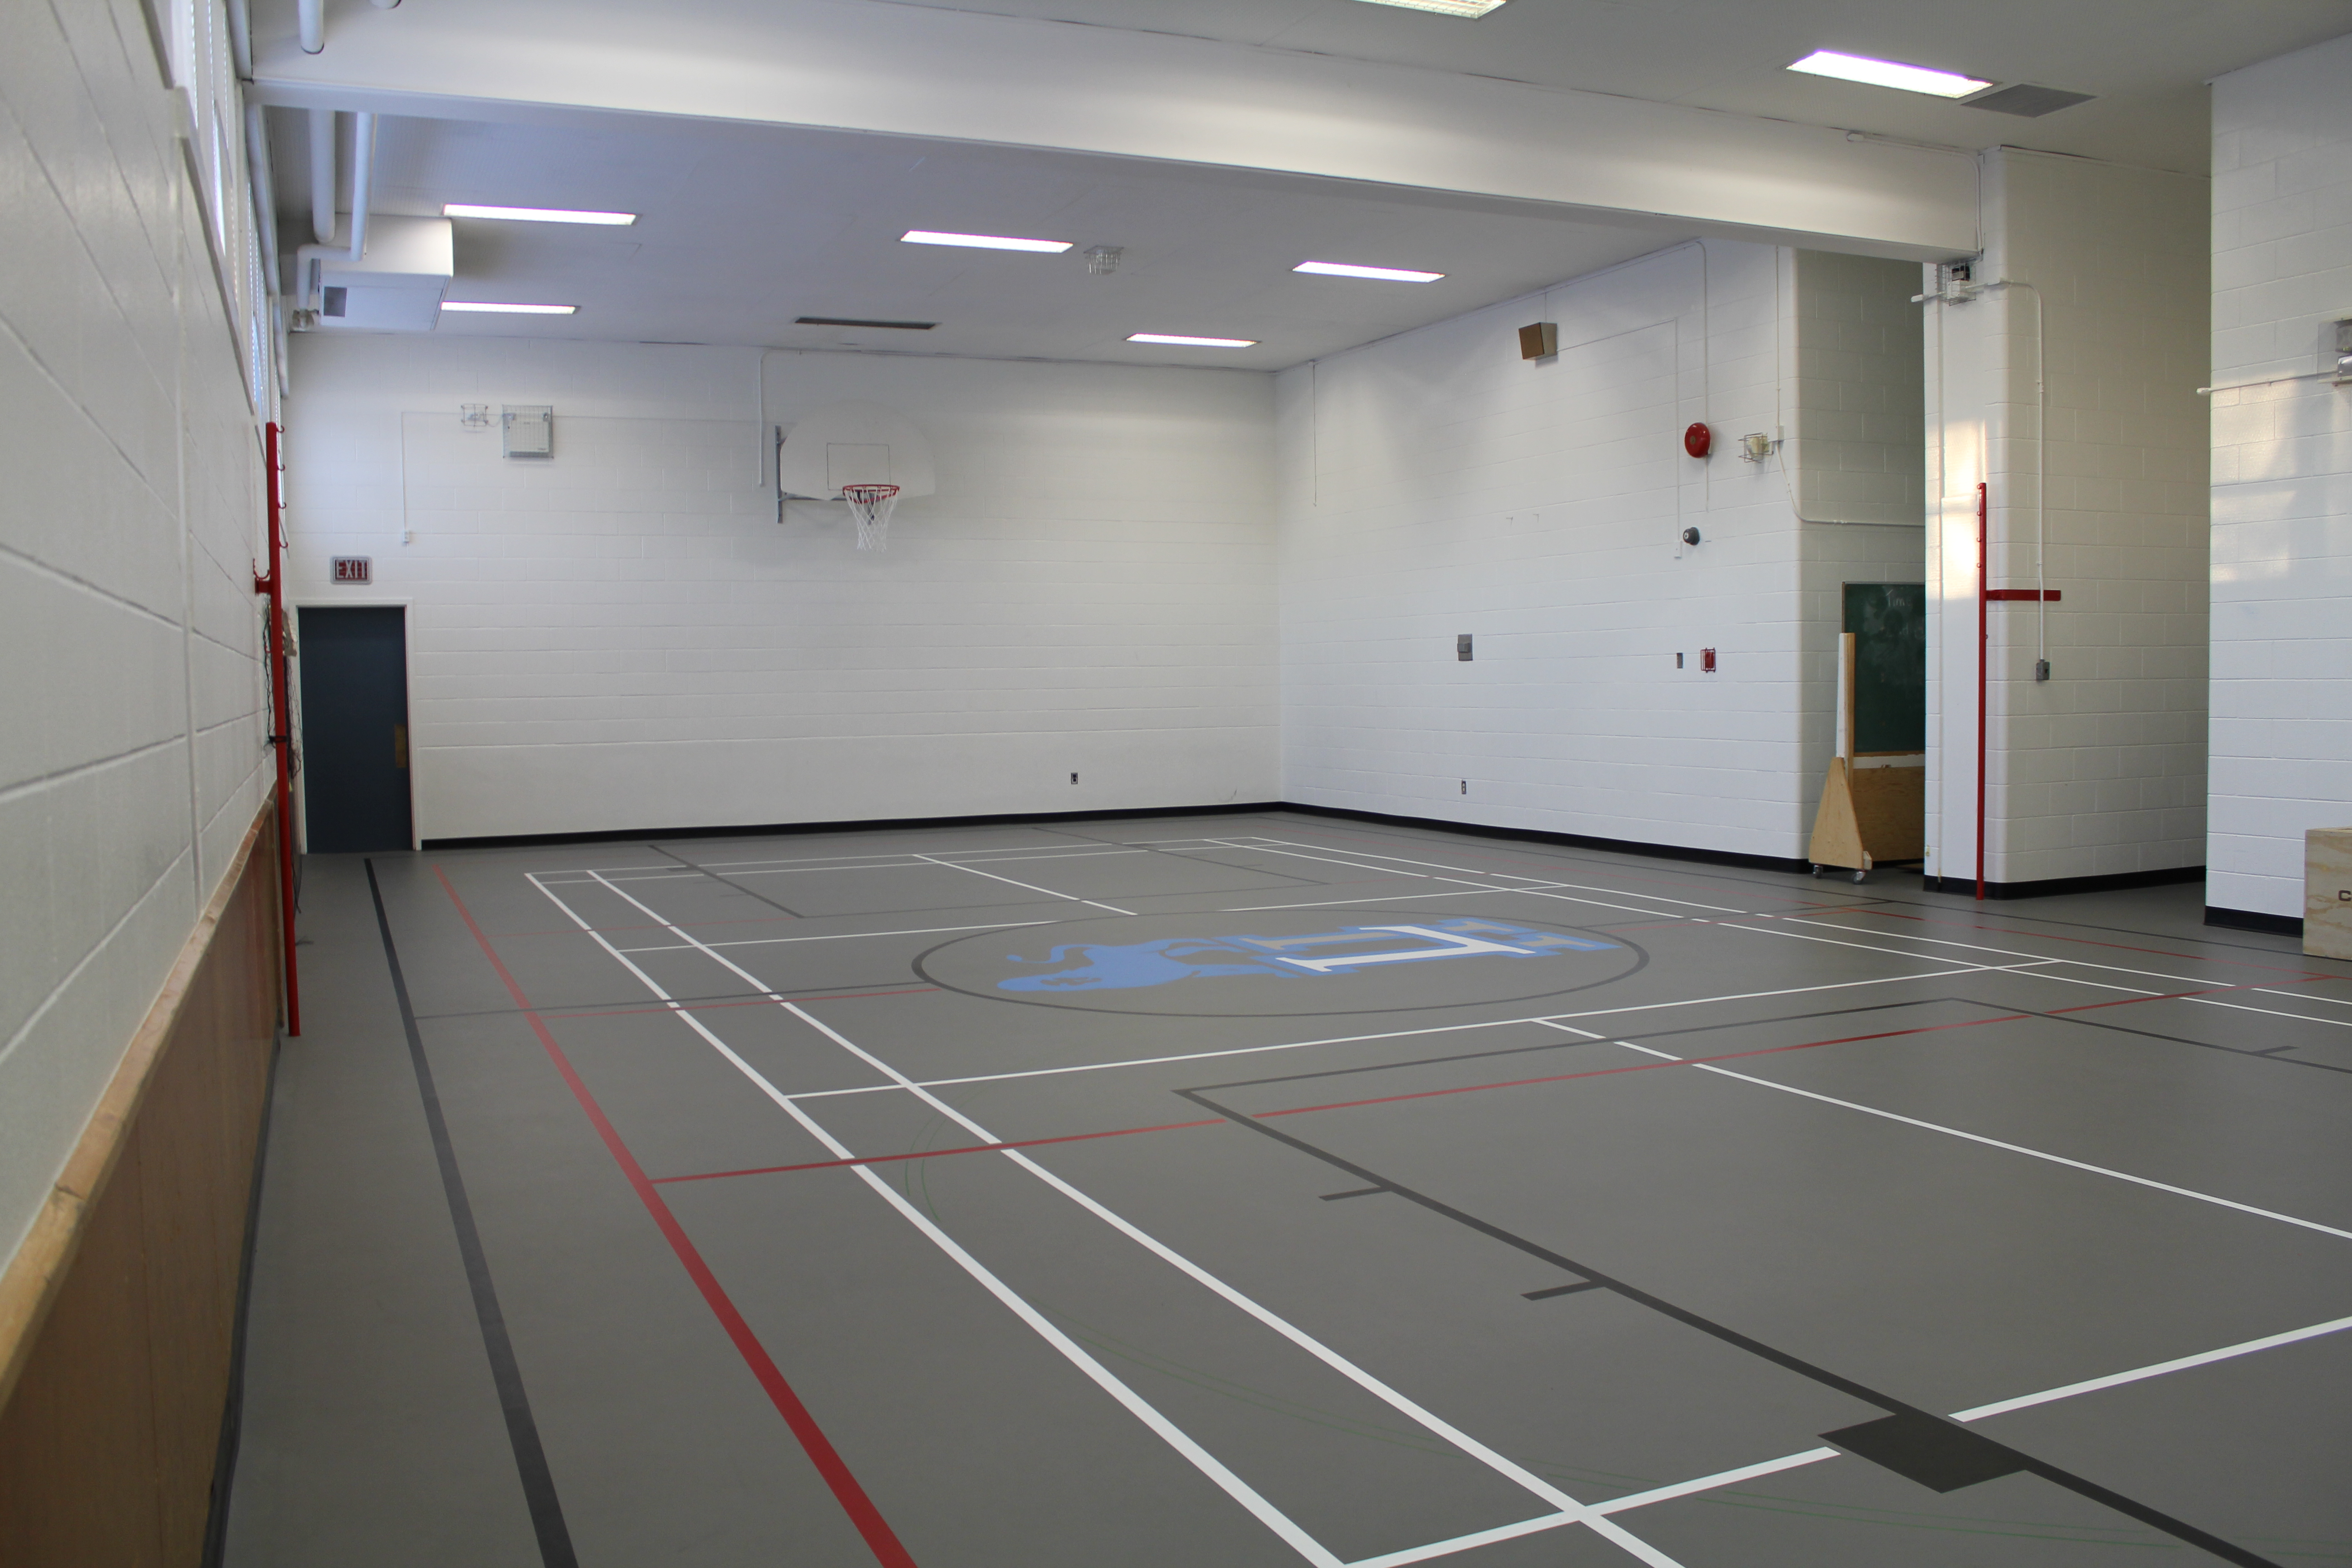 Our Small Gym after construction.